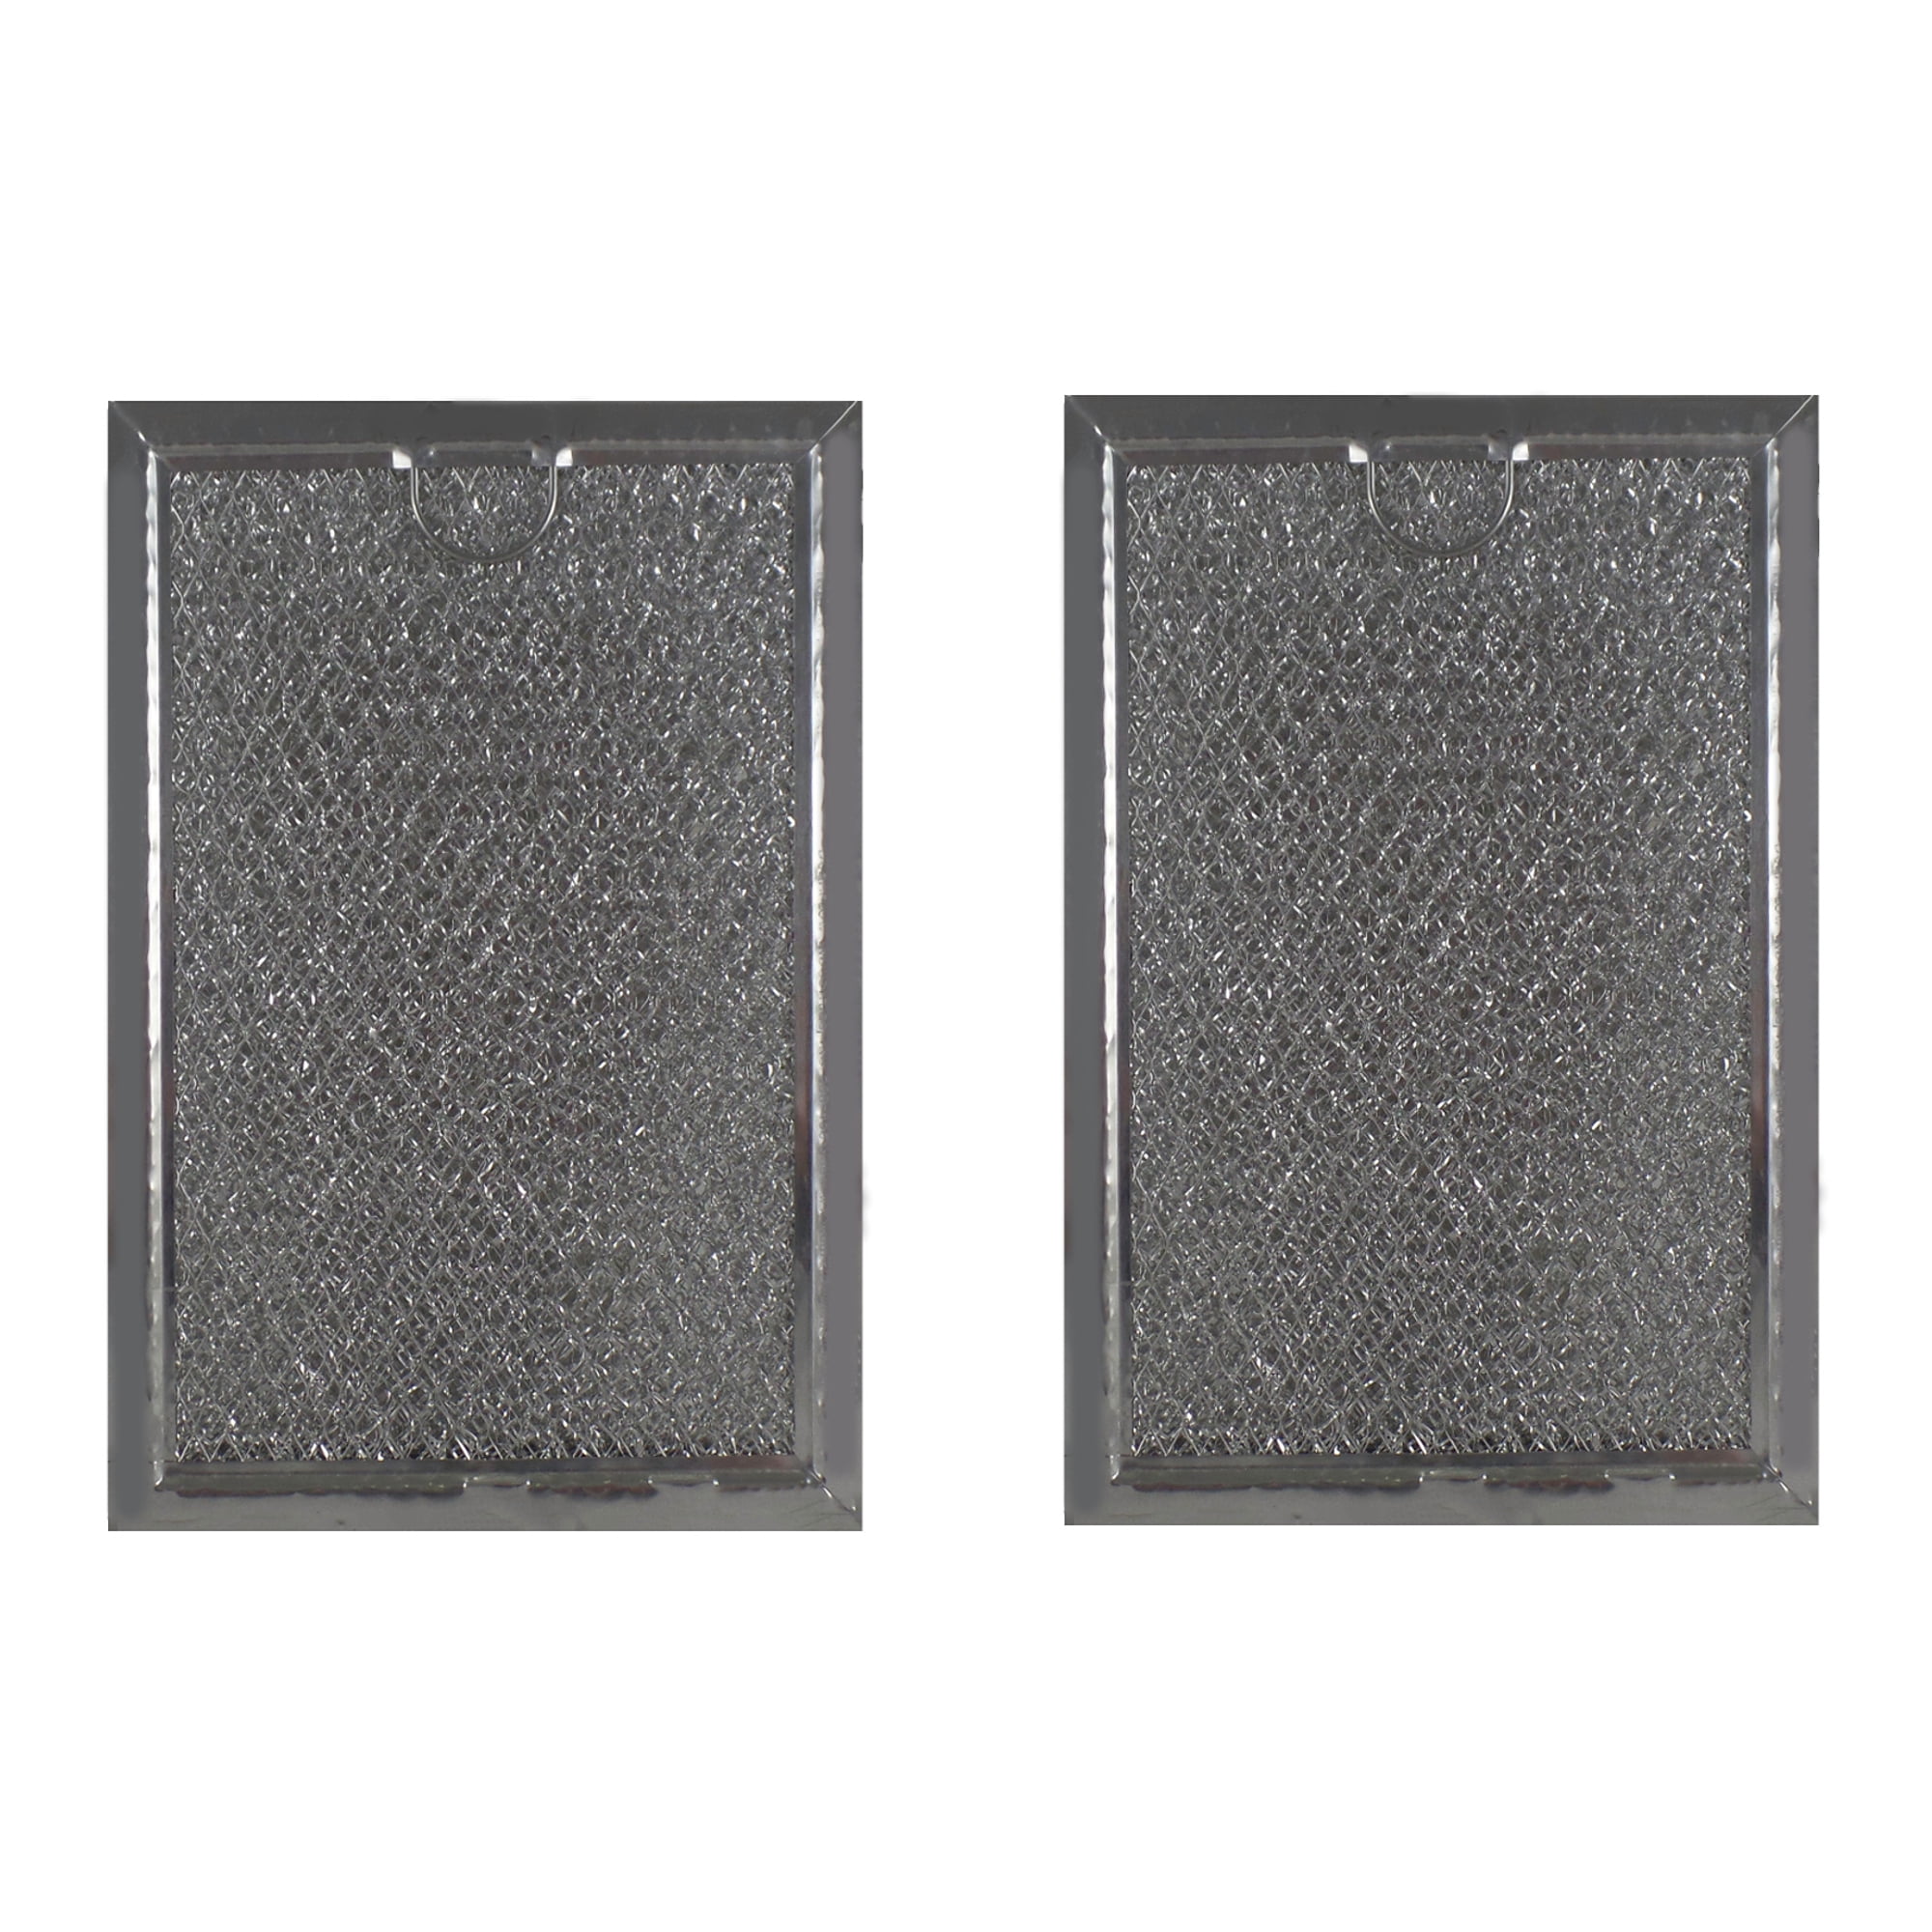 2-PACK Replacement Mesh Grease Filters for Whirlpool 4358853 Made in the USA 